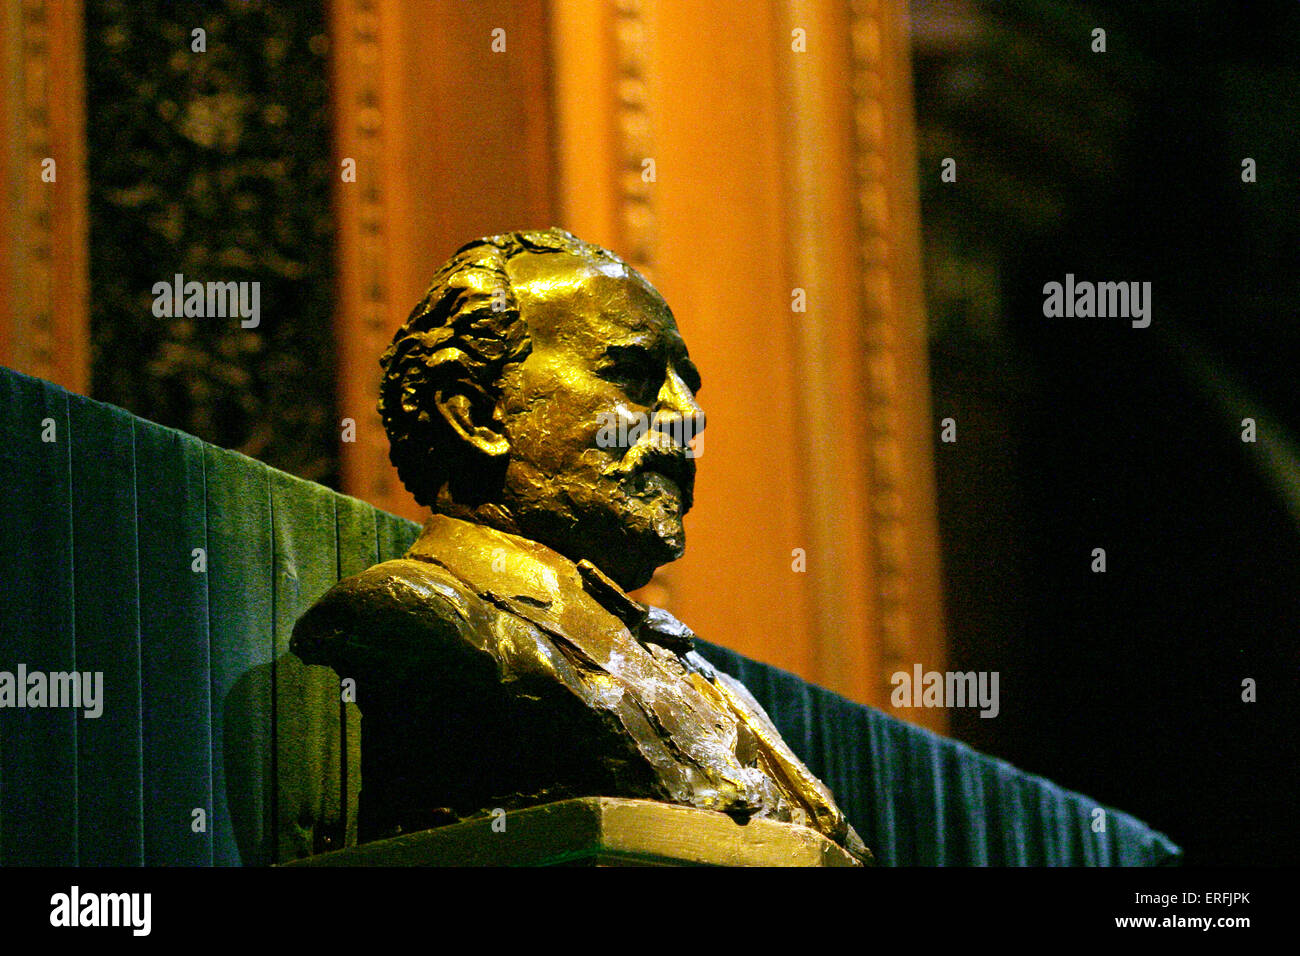 Sir Henry Wood - bust of English conductor at the Royal Albert Hall, London. 3 March 1869 – 19 August 1944. Prom, proms, Stock Photo